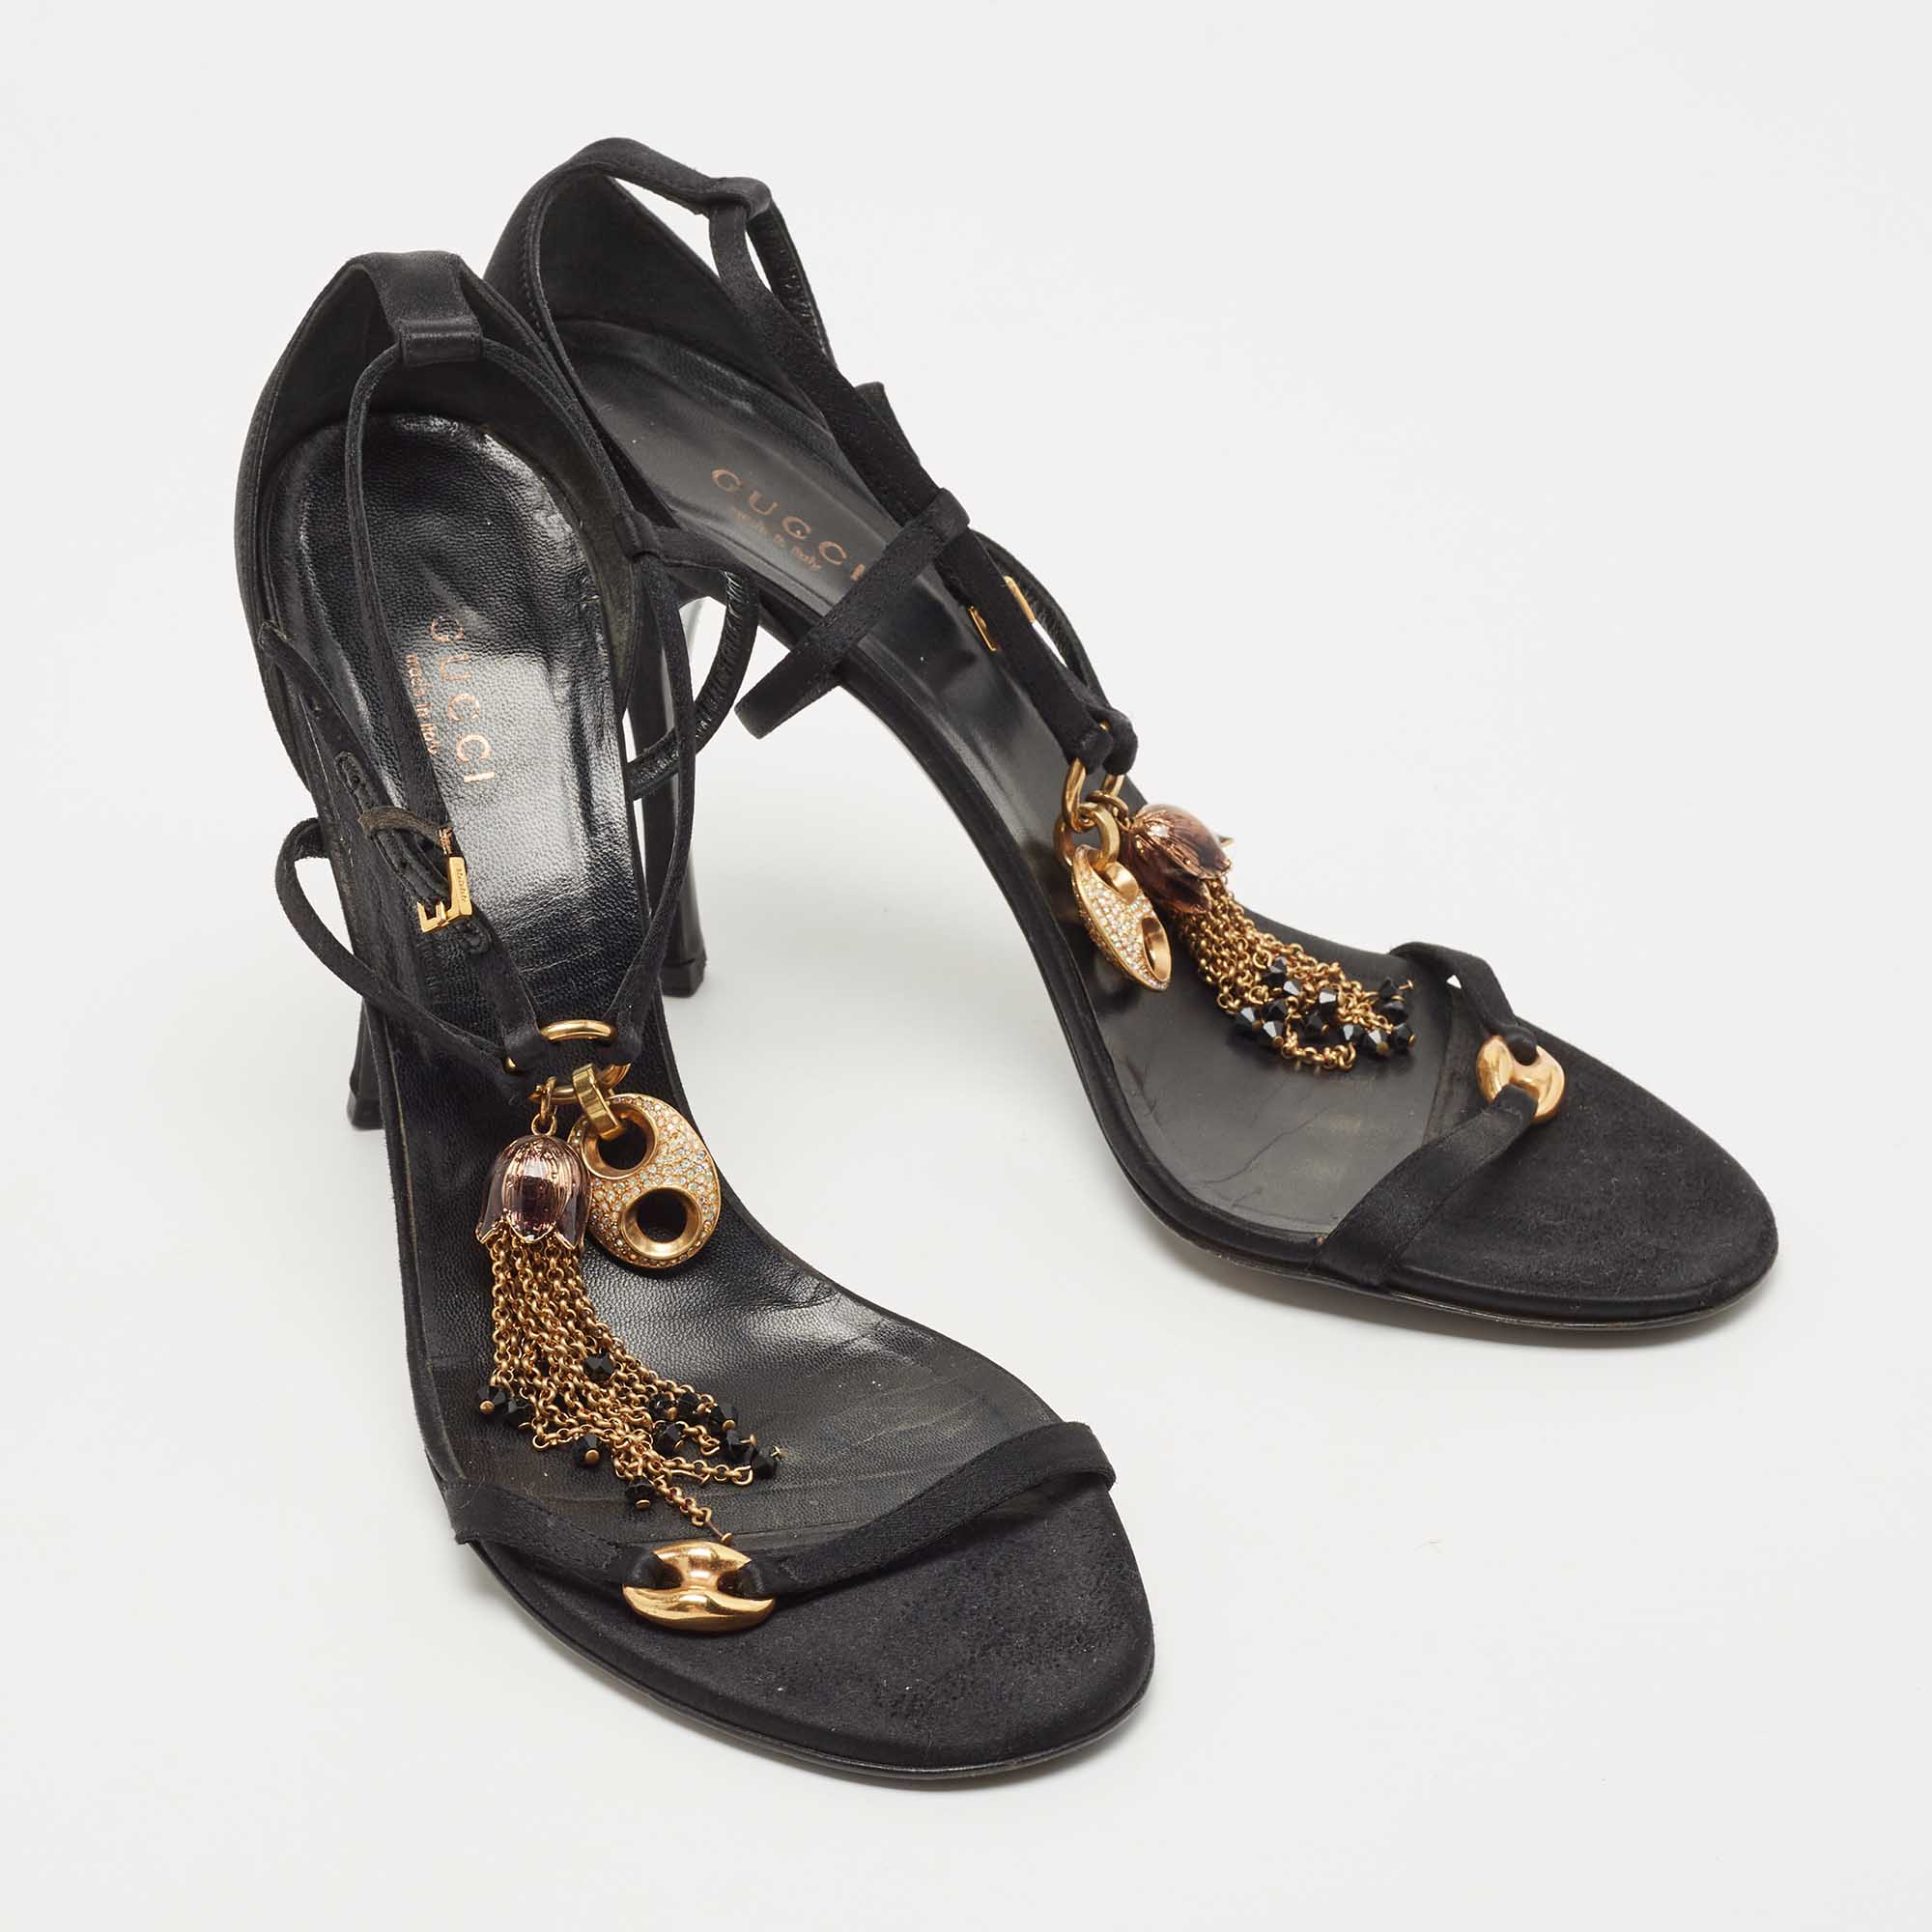 Gucci Black Satin And Leather Embellished Ankle Strap Sandals Size 40.5